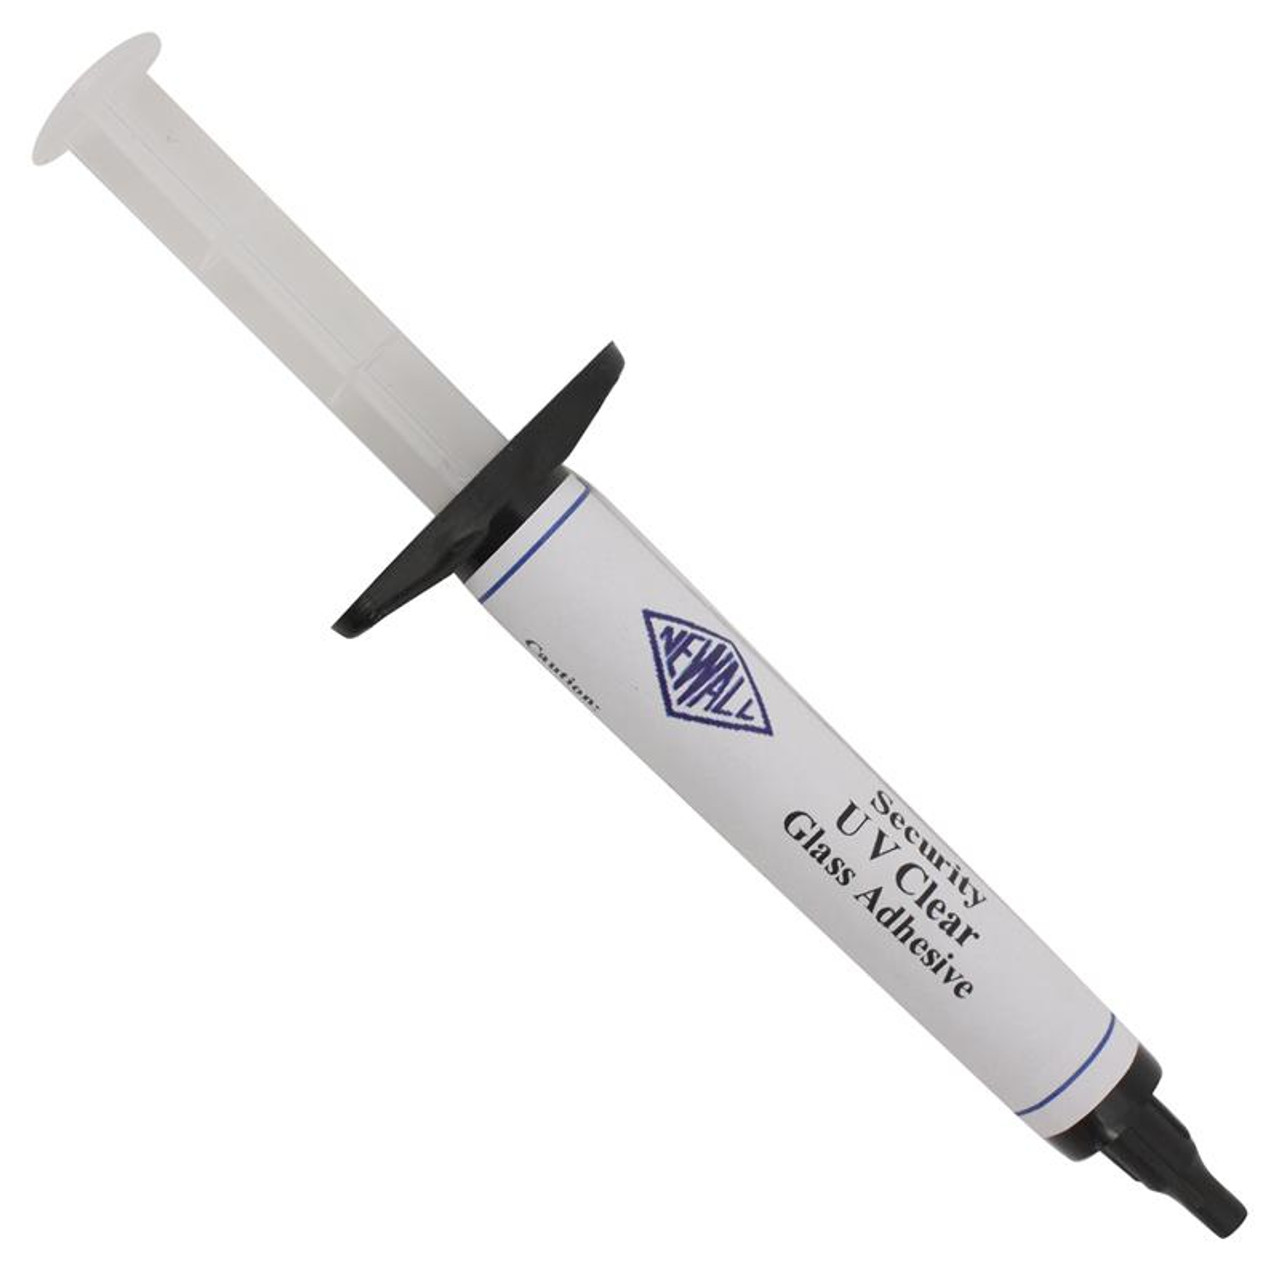 UV Glue Security UltraViolet Adhesive for Glass and Watch Crystals with  Precision Needle Applicator